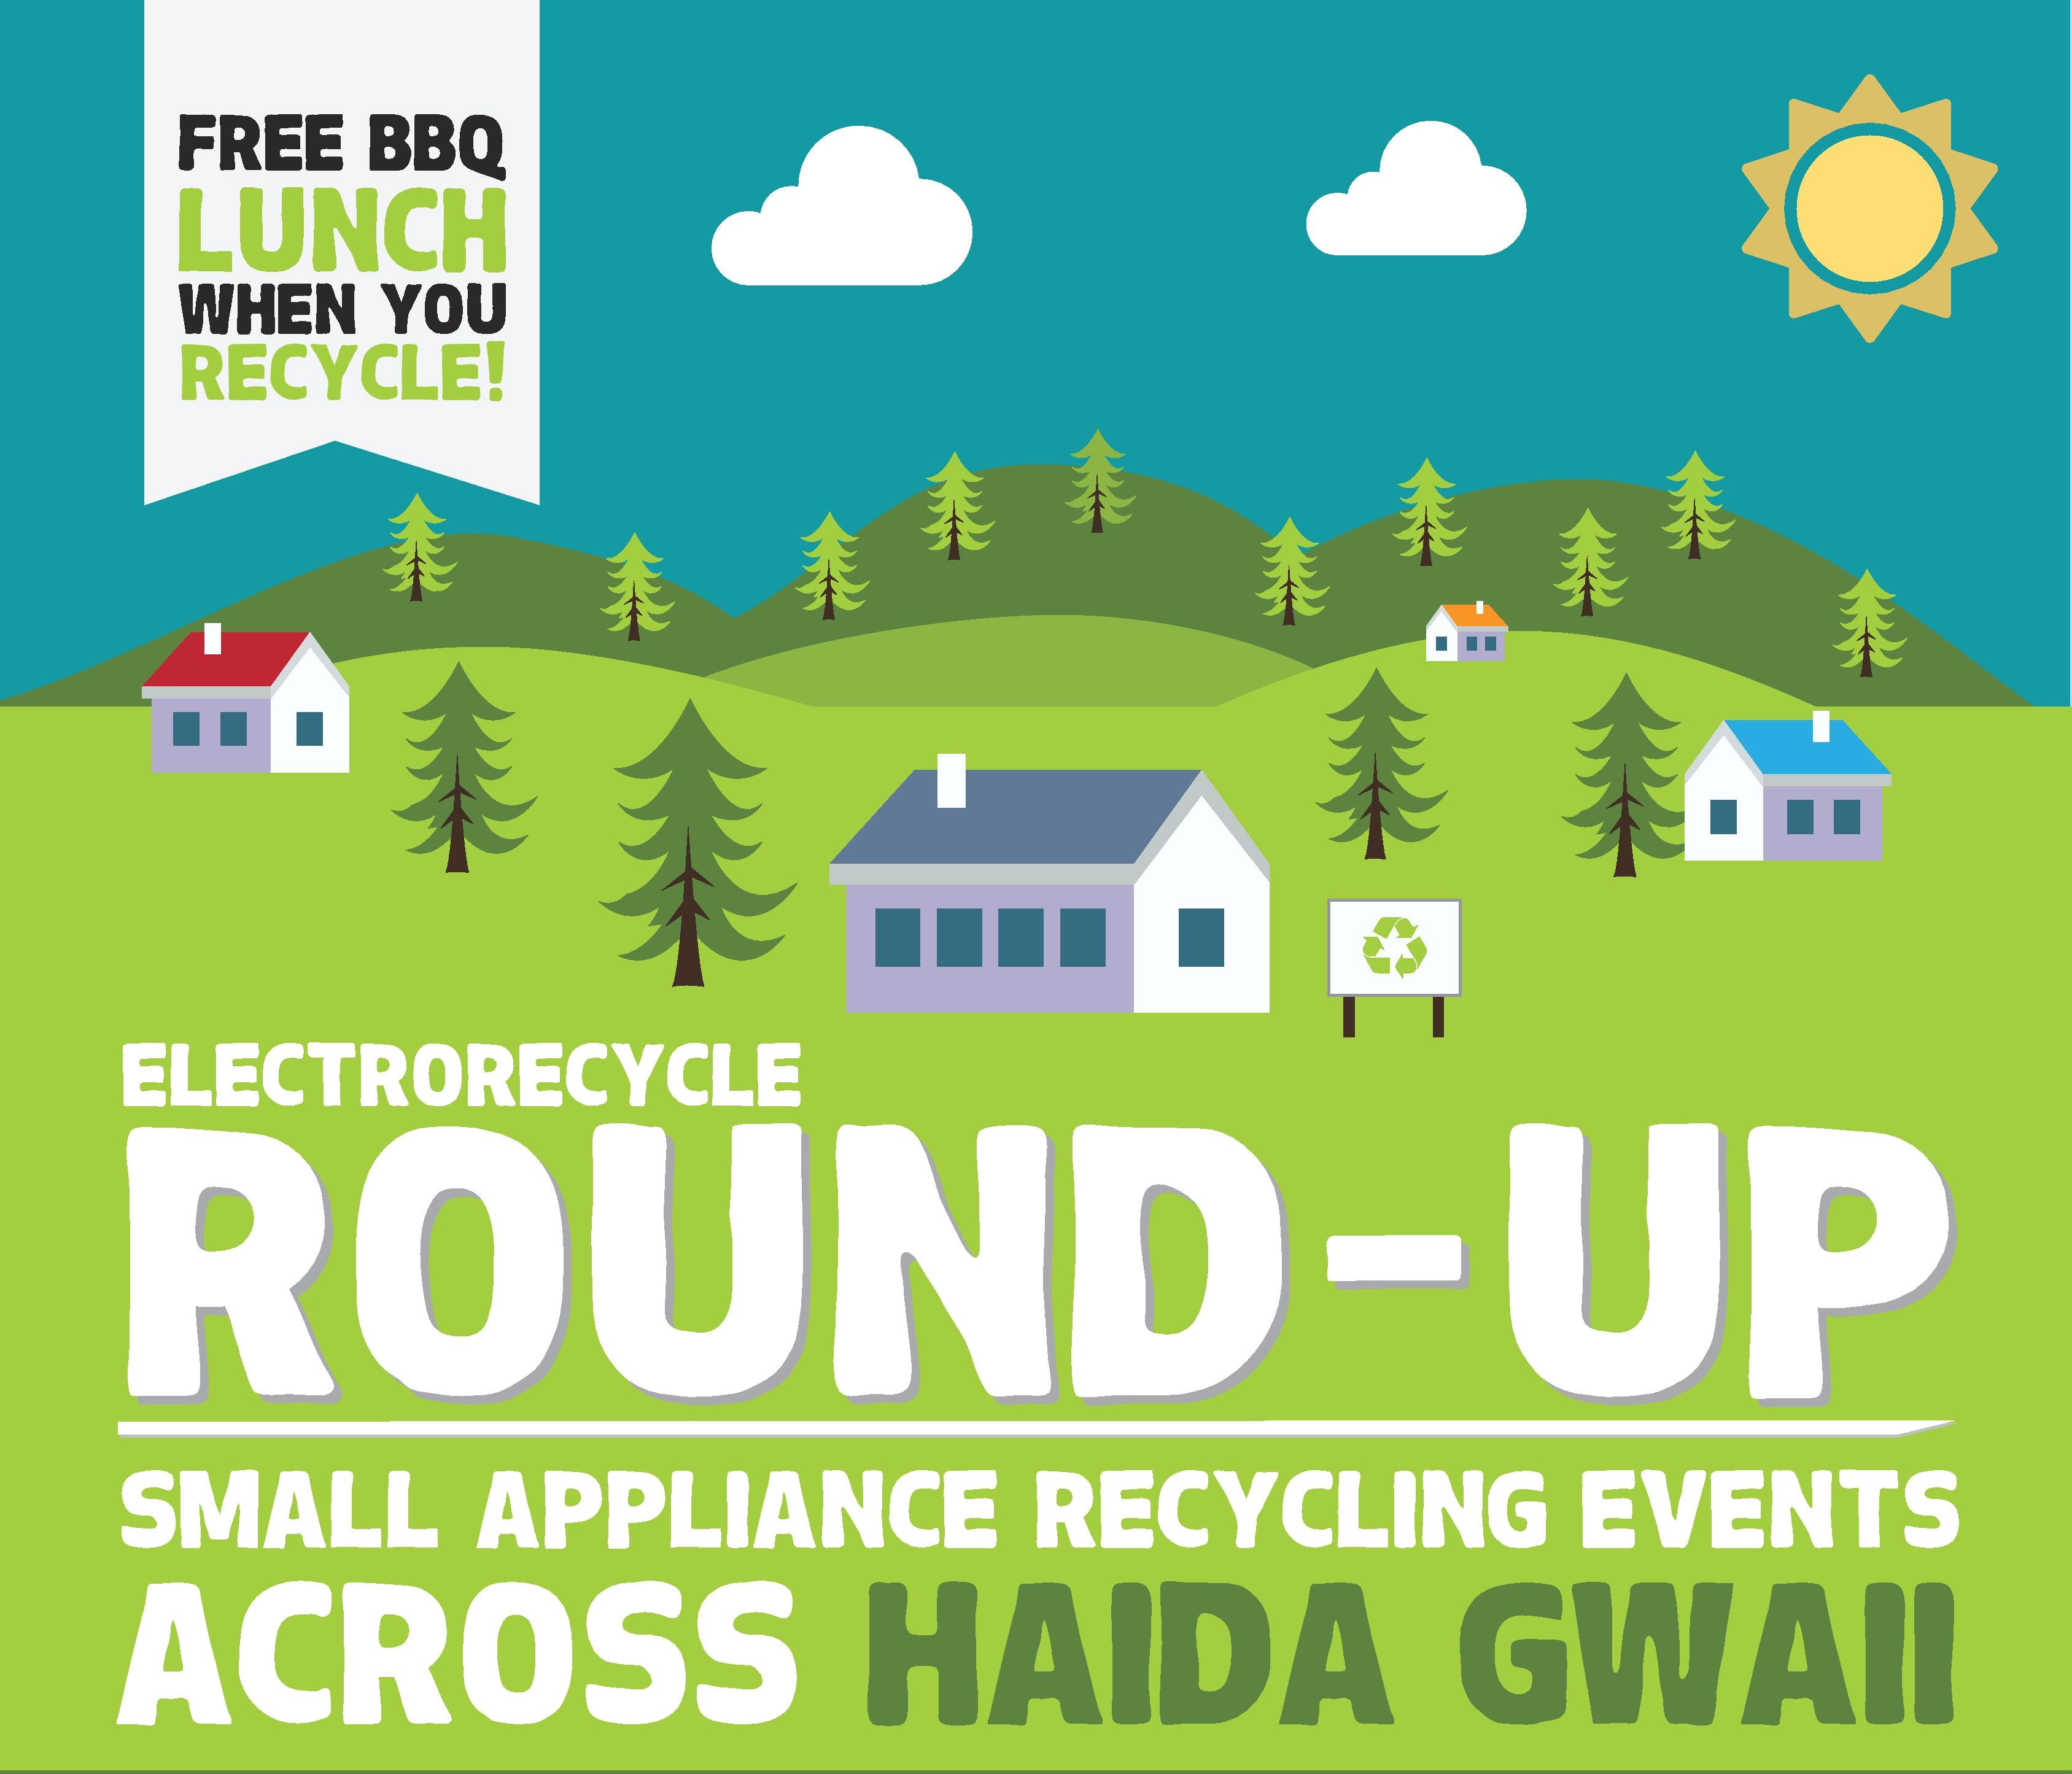 ElectroRecycle Round-up and BBQ - Sandspit